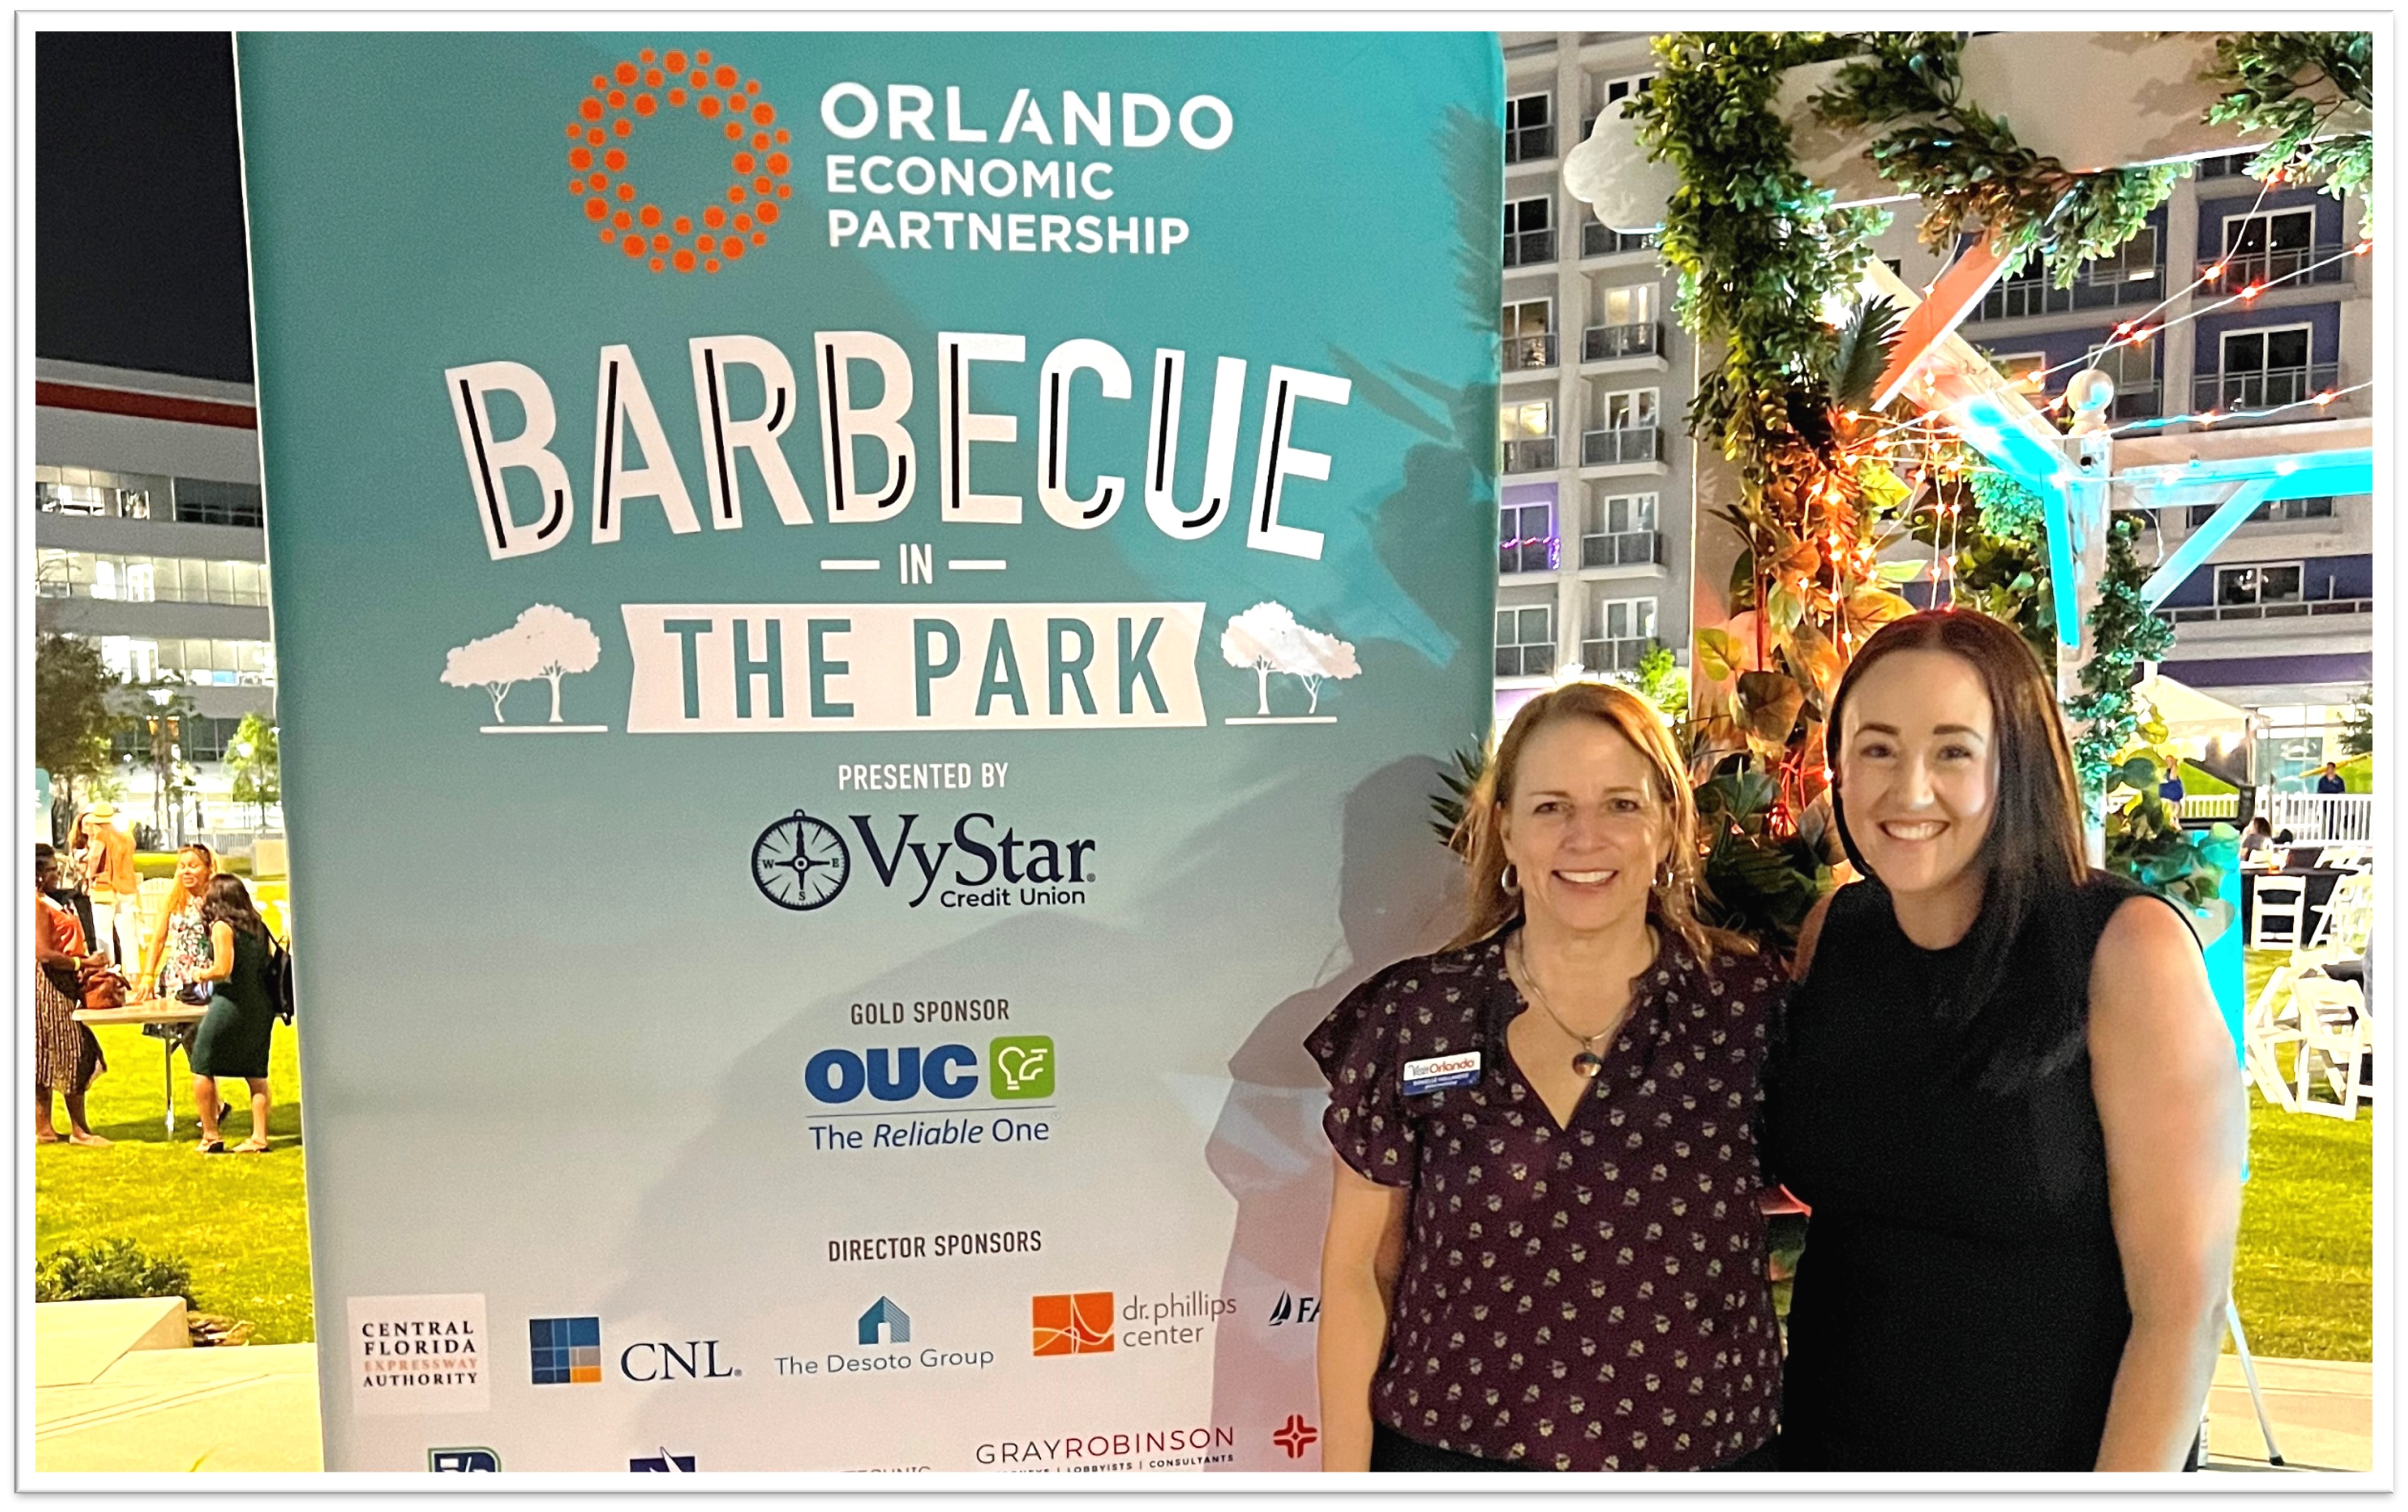 Visit Orlando's chief marketing officer, Danielle Hollander, and director of community relations & external affairs, Kristin Rothbauer-Westover, at OEP's BBQ in the Park event. 